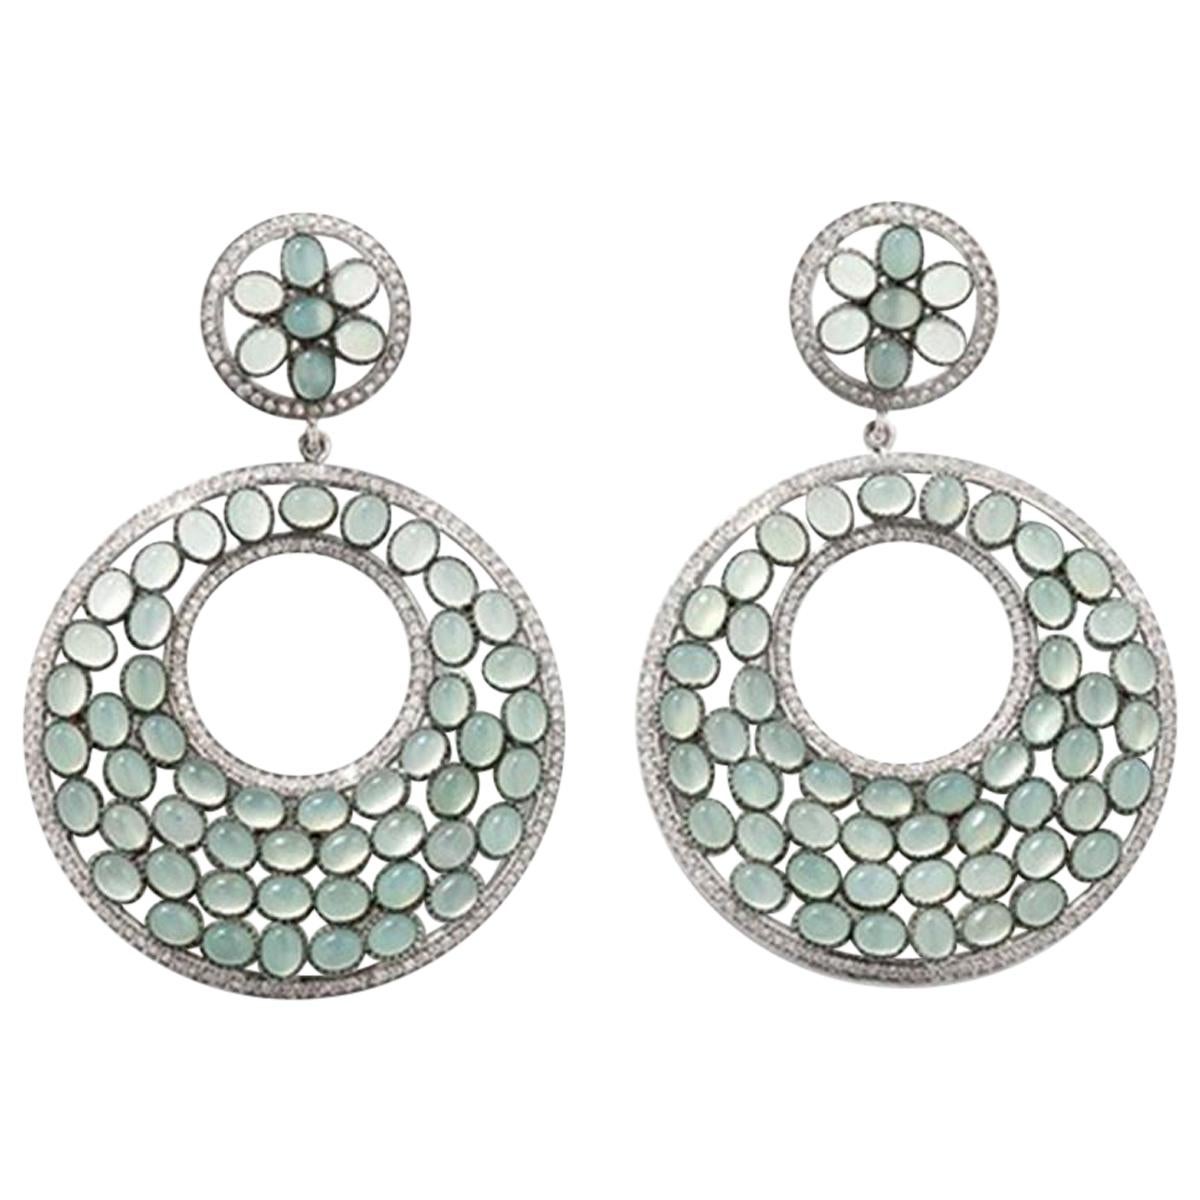 Earrings with 424 Zircons and 114 Calzedones, Sterling Silver For Sale